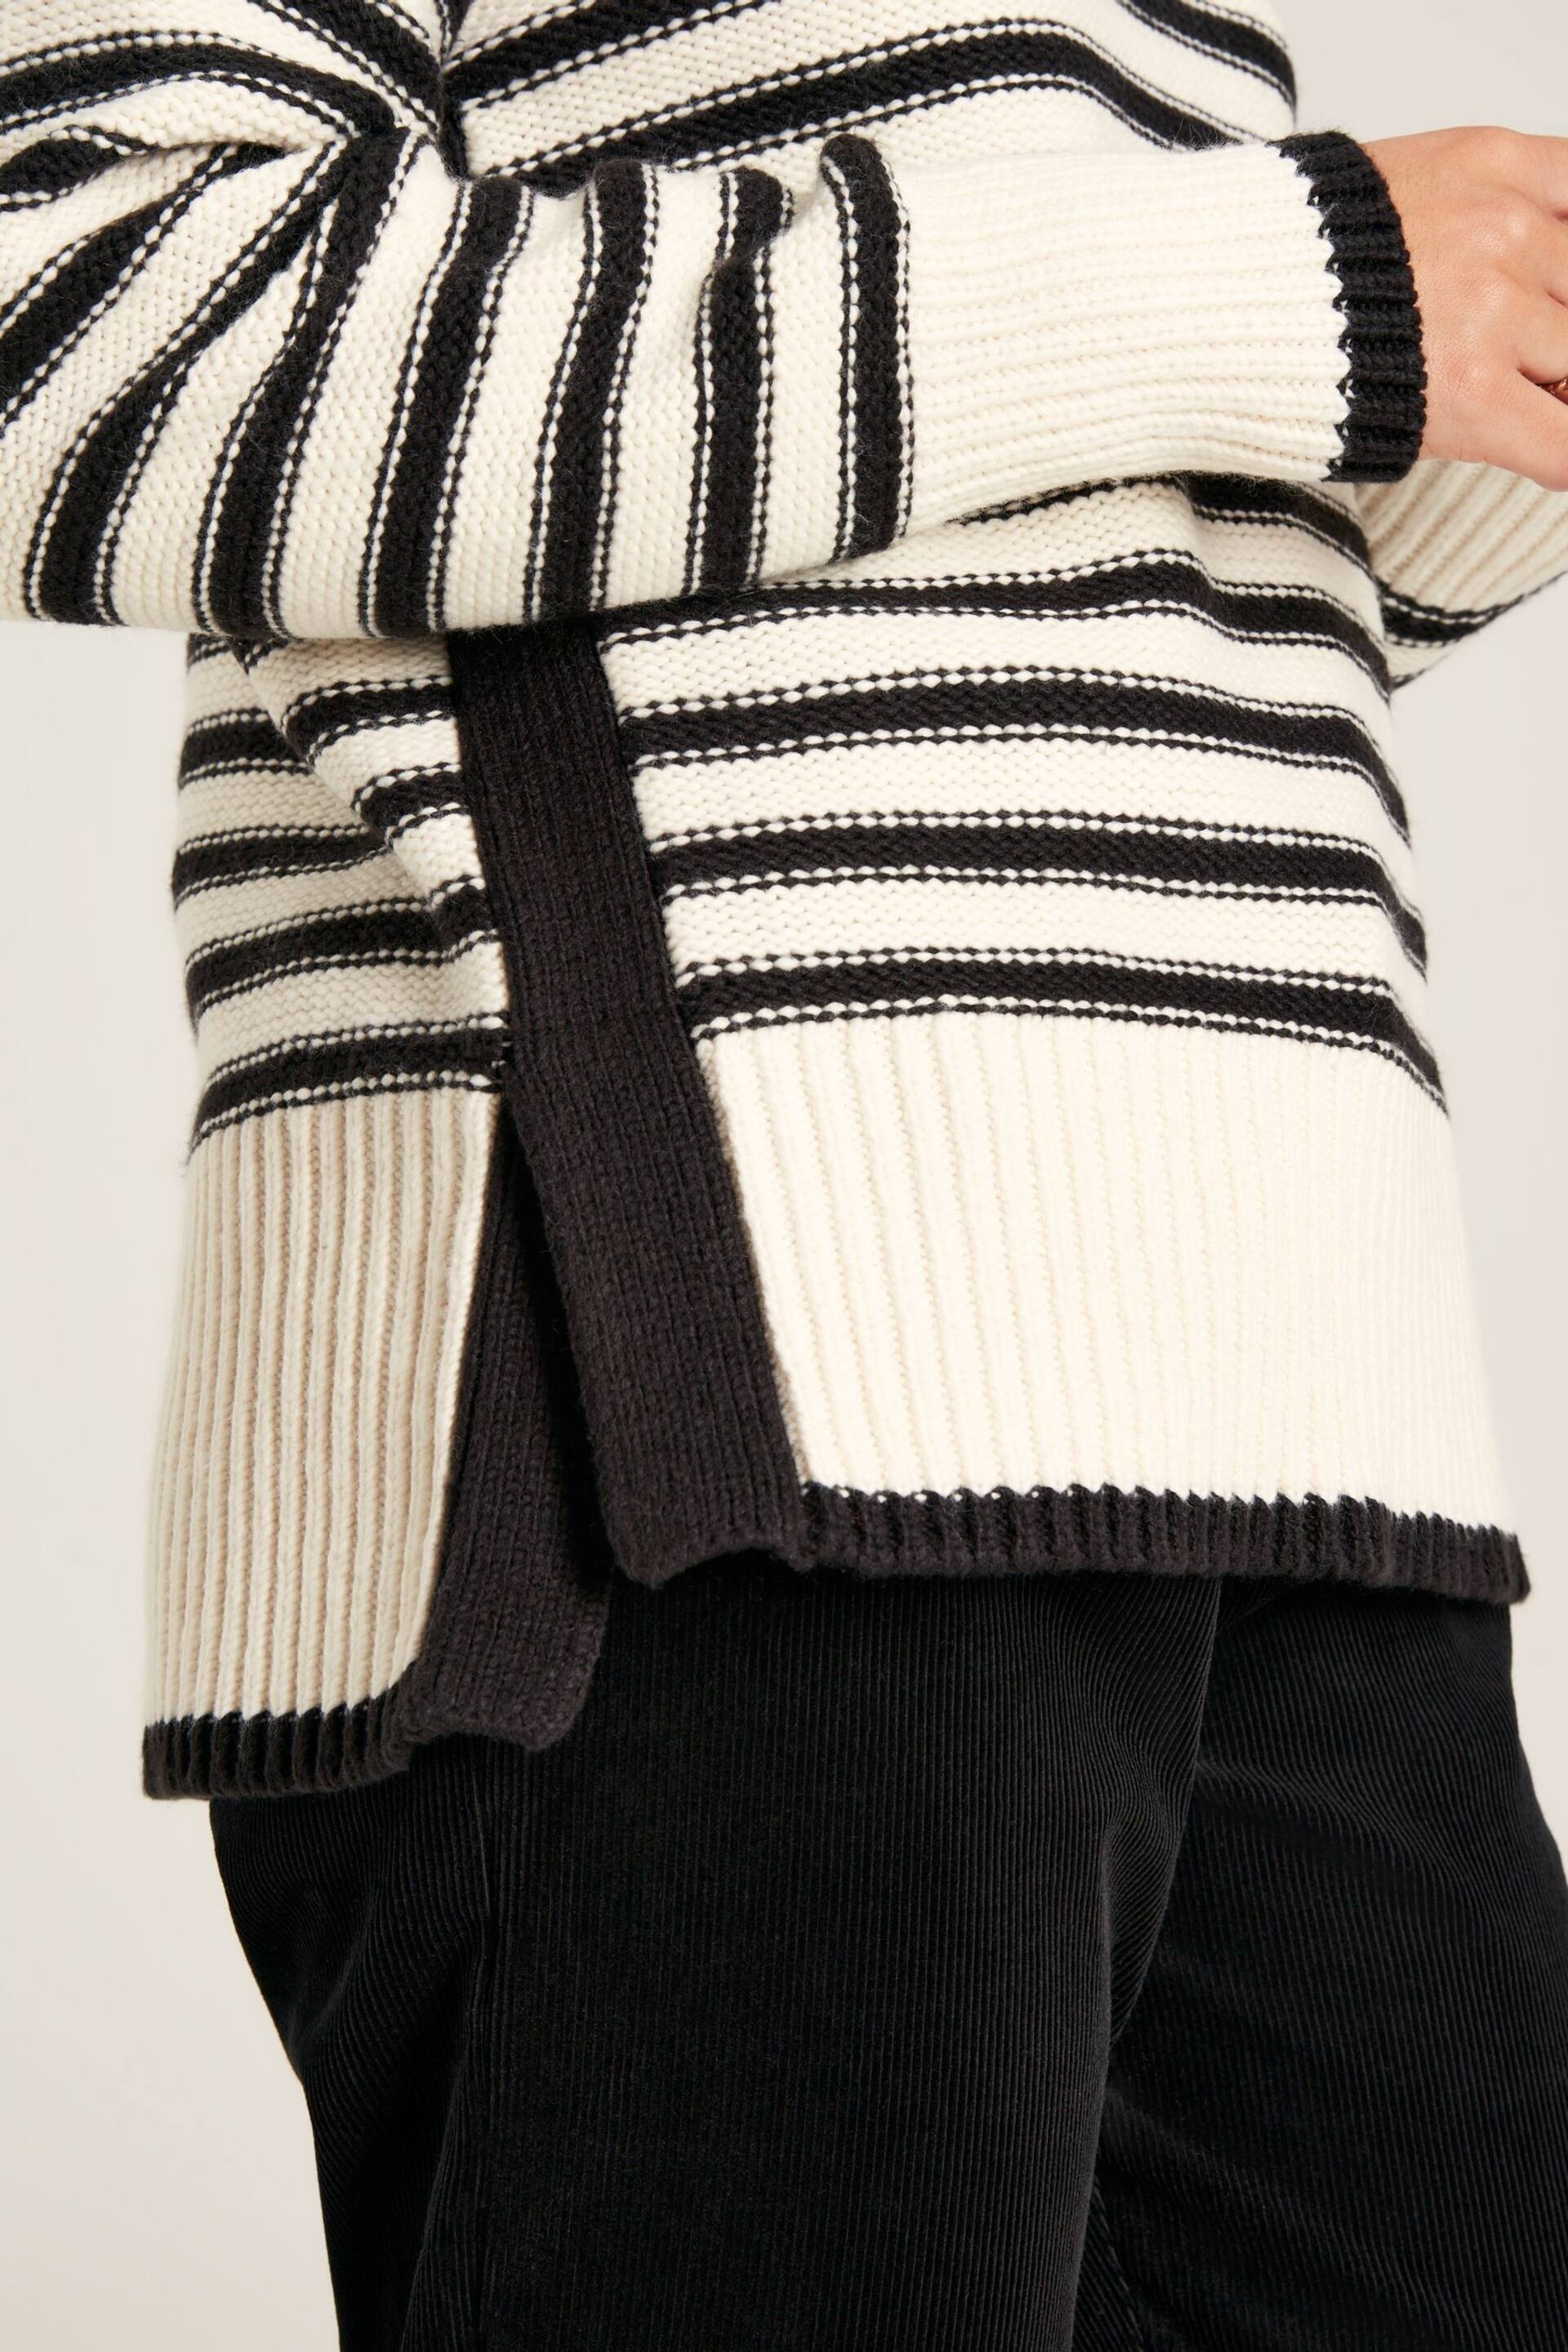 Joules Tandie Black/Cream Striped High Neck Jumper - Image 6 of 7